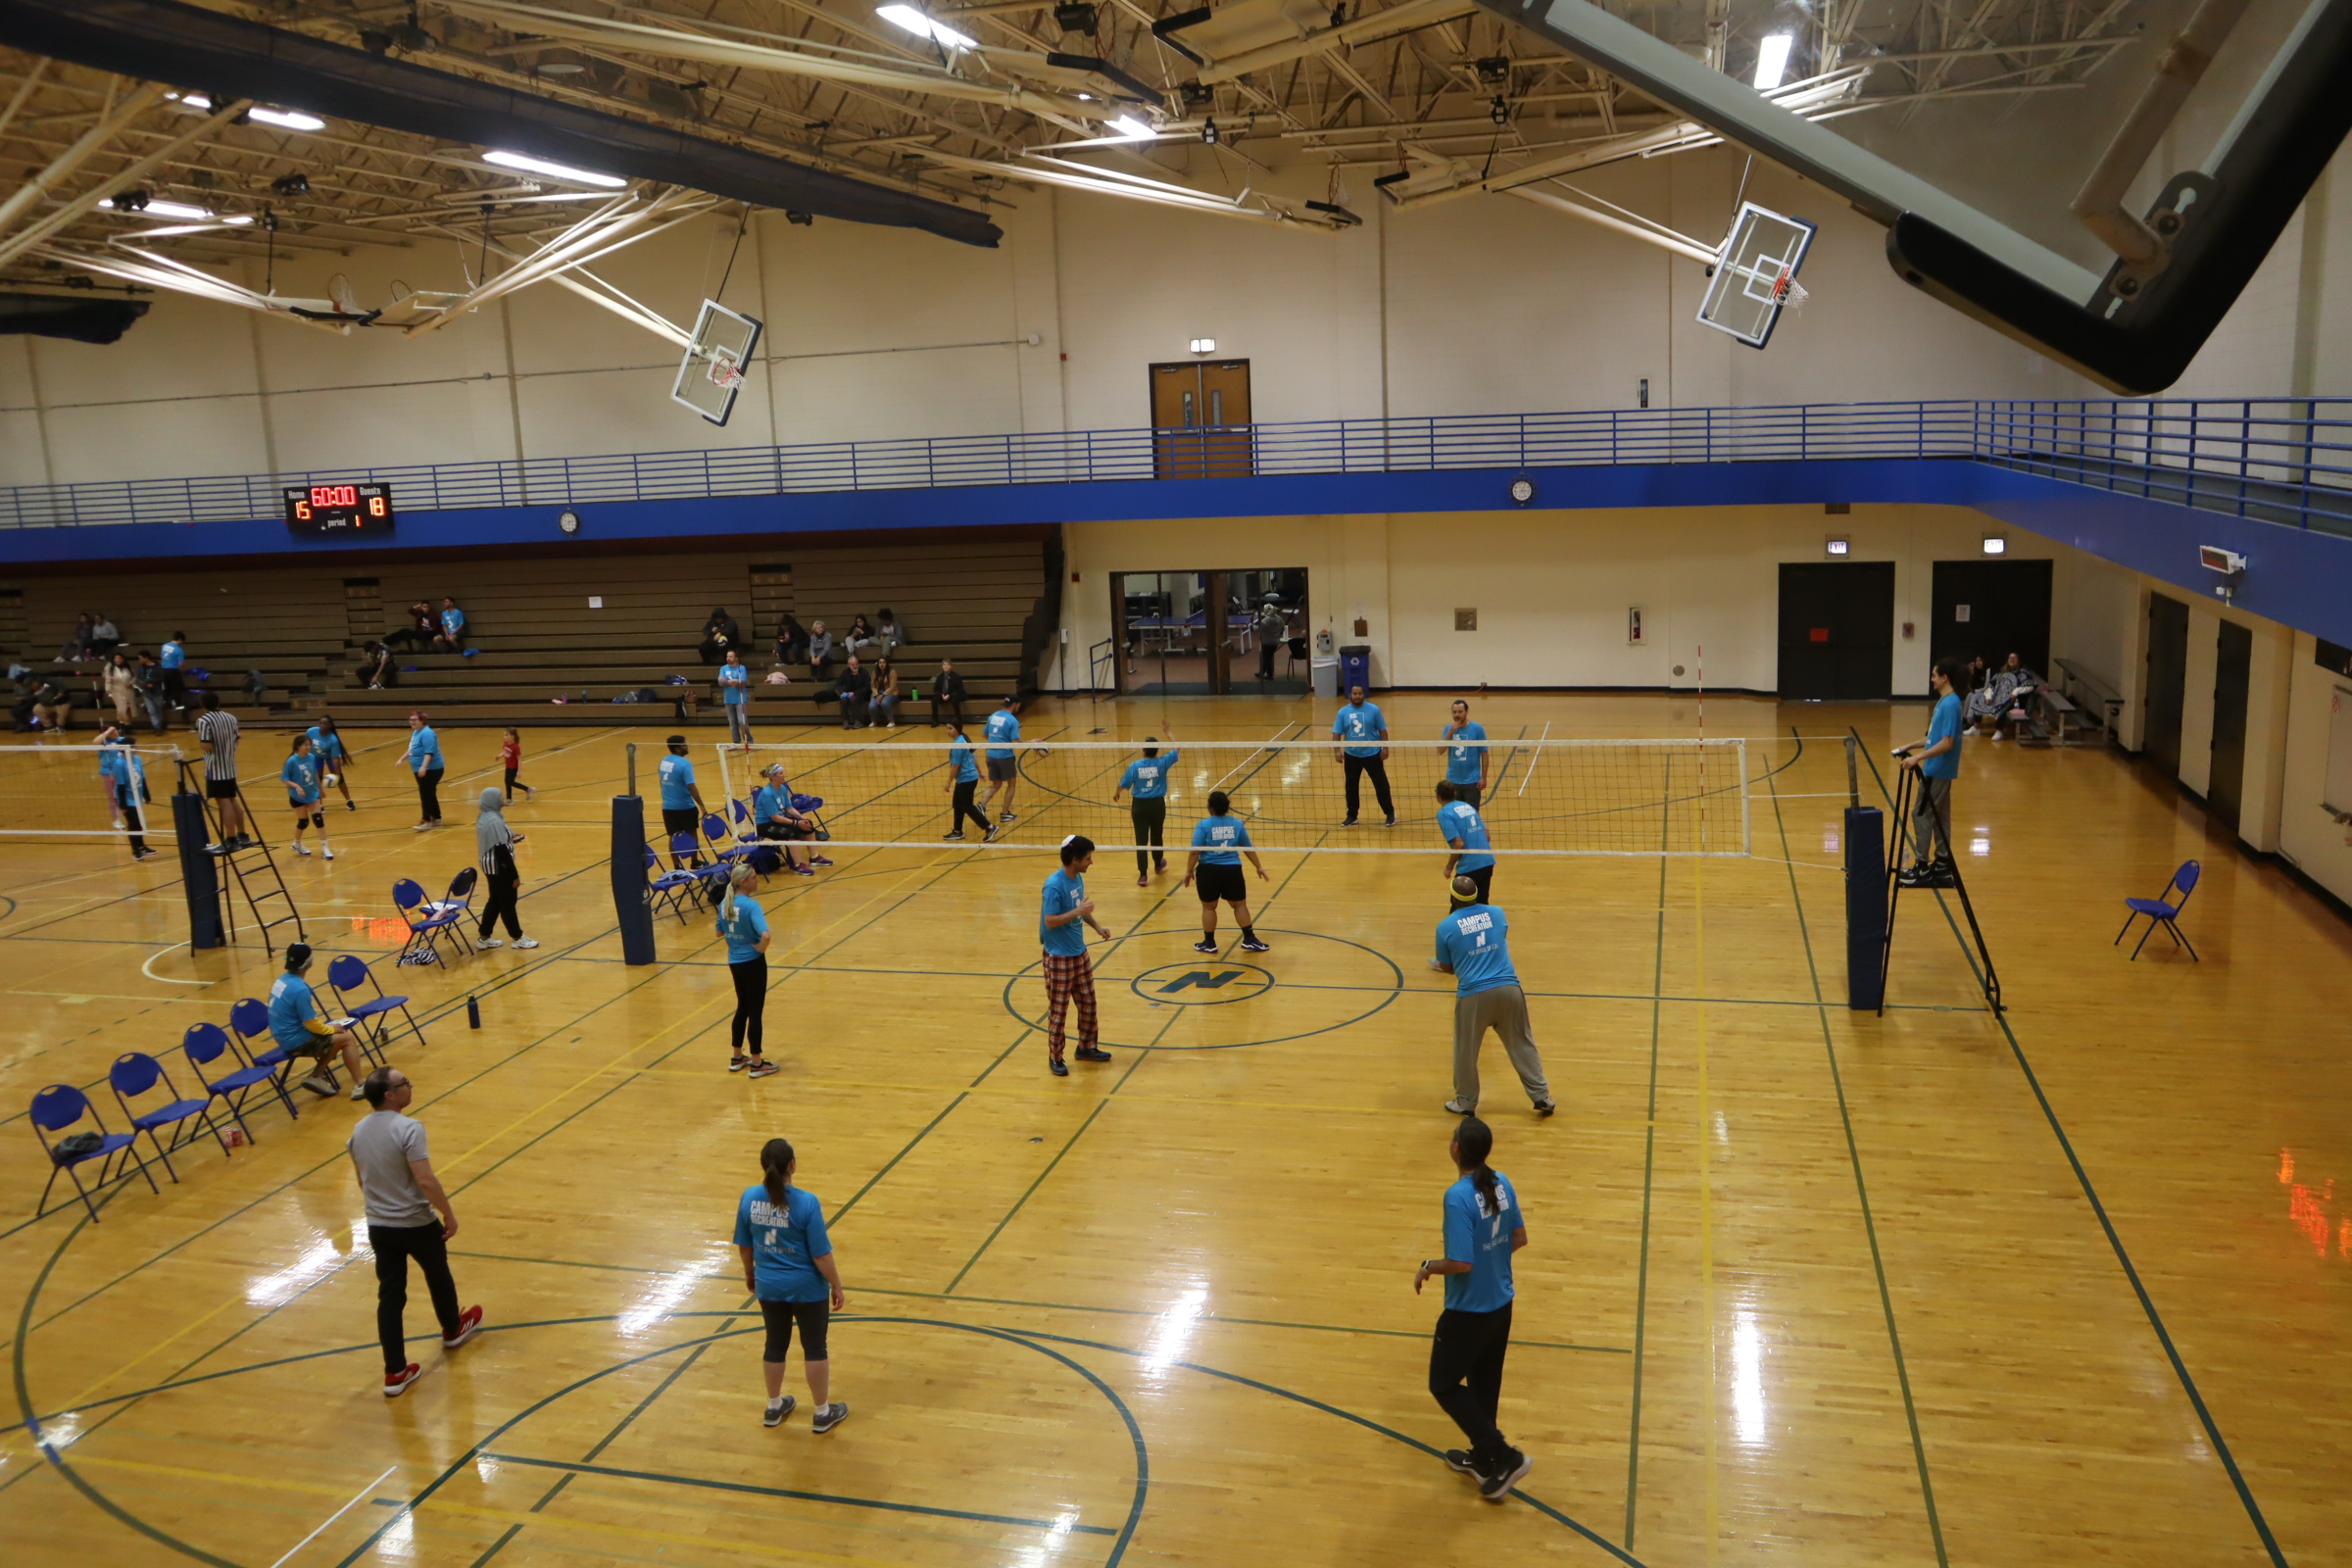 Students playing volleyball in the gym